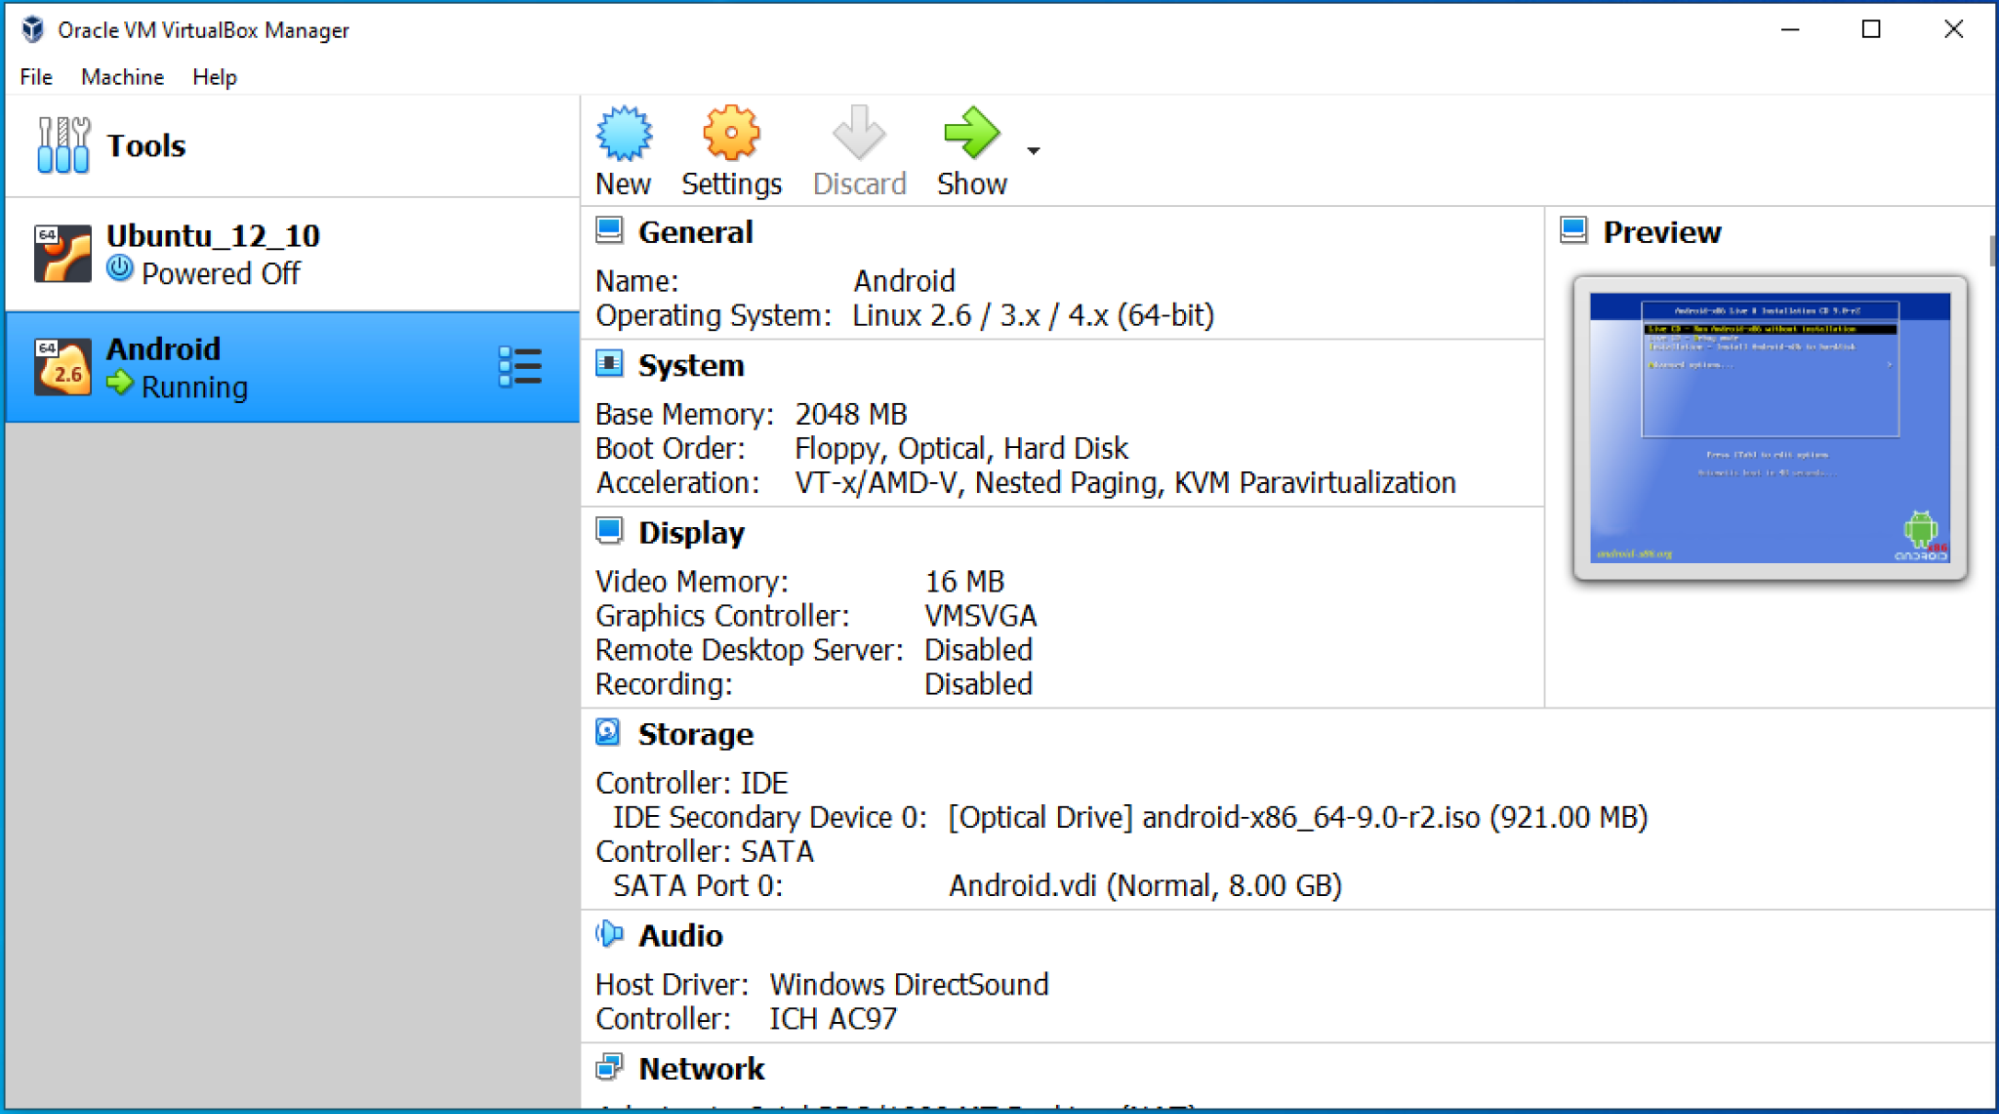 The Virtualbox app shows that the android virtual machine is running